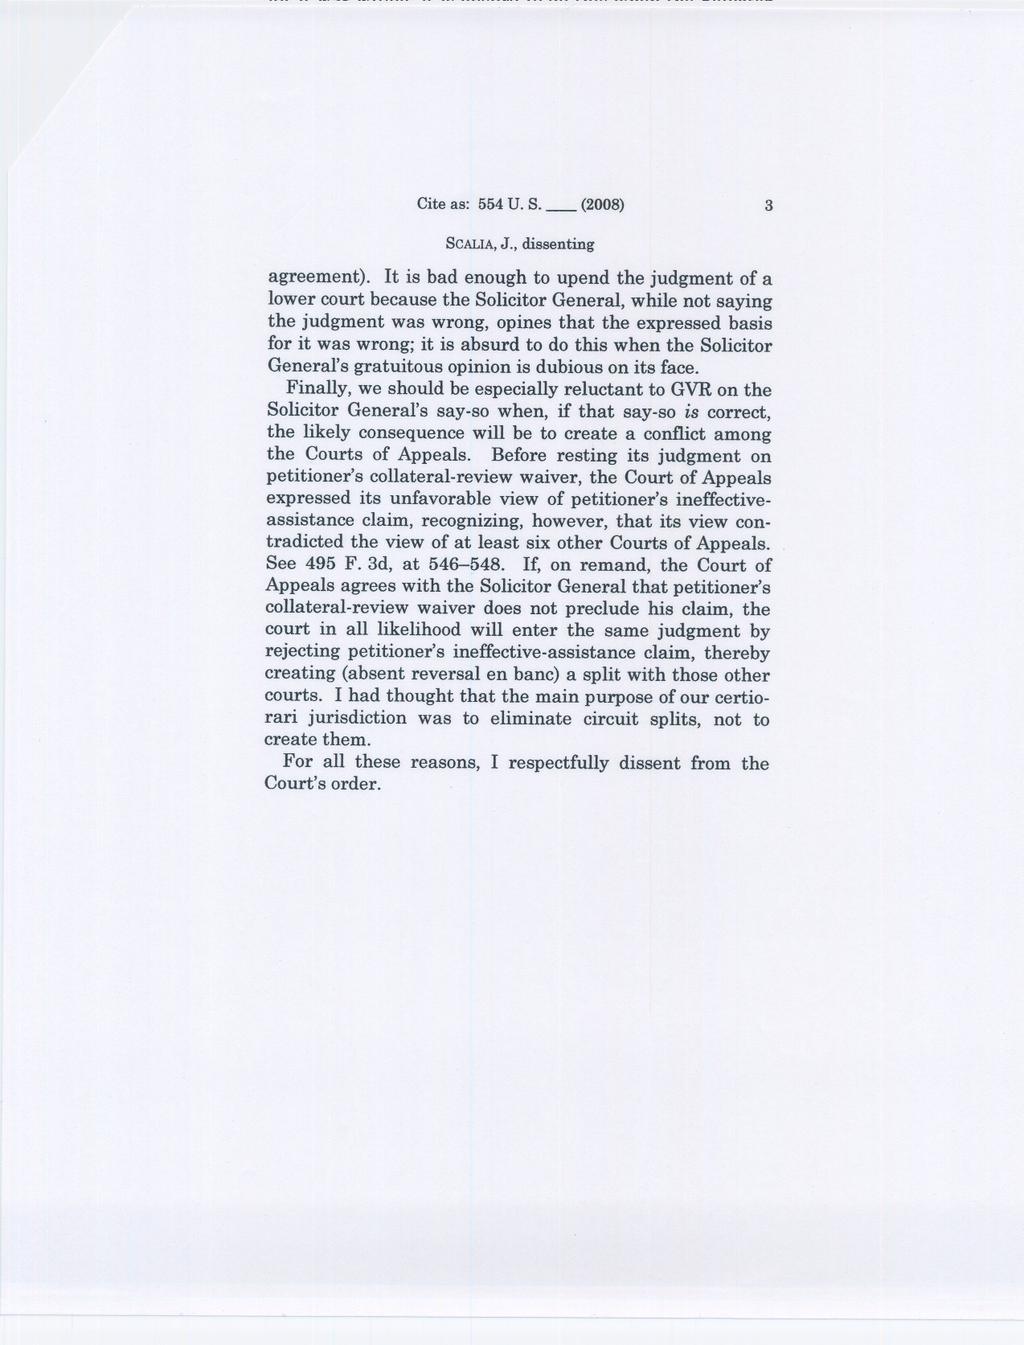 Cite as: 554U. S._ (2008) 3 agreement).